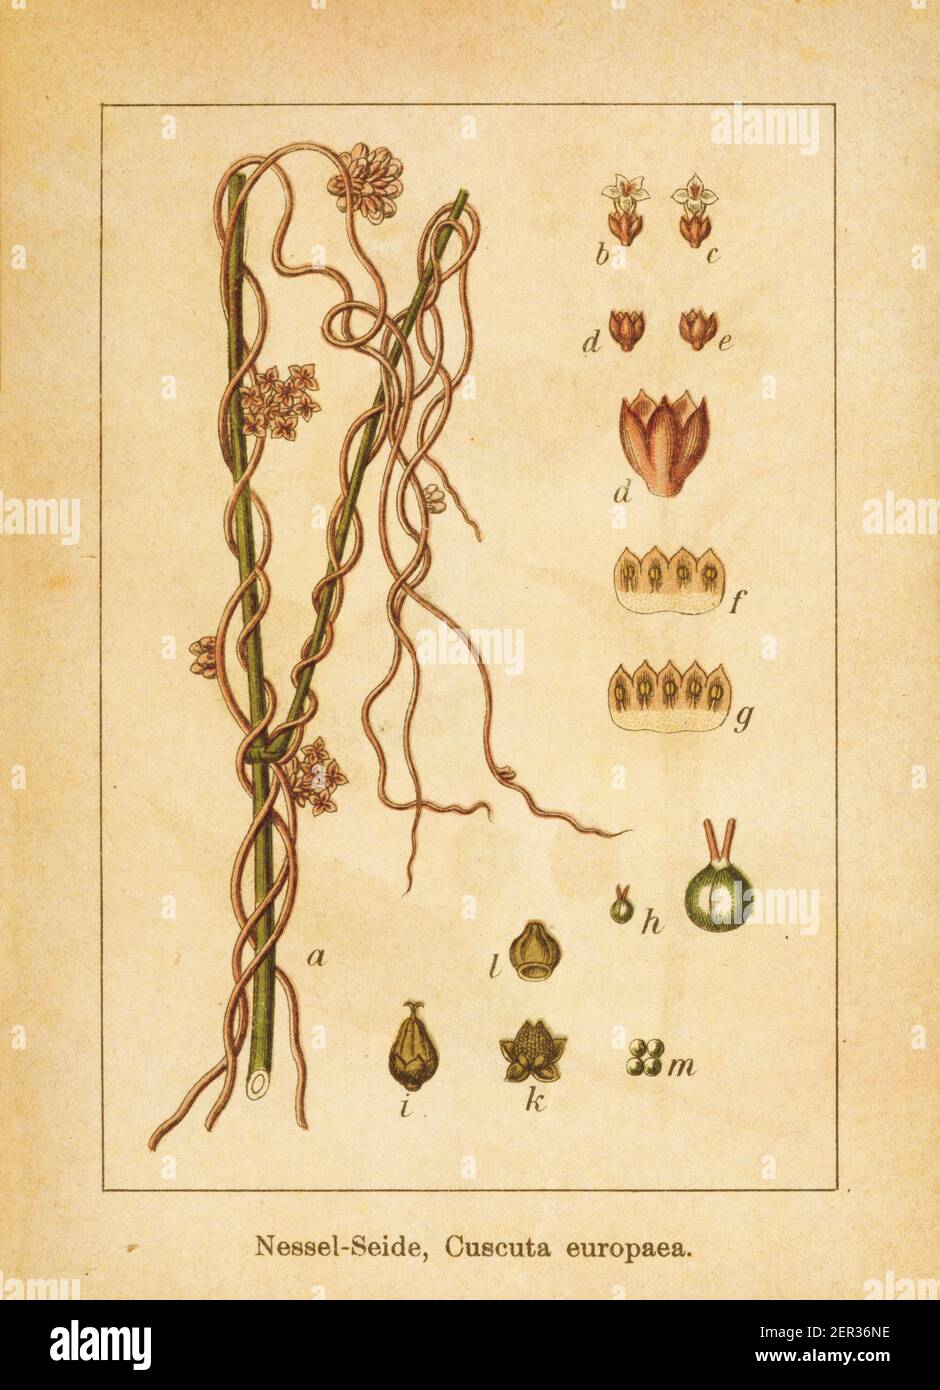 Antique illustration of a cuscuta europaea, also known as greater dodder or European dodder. Engraved by Jacob Sturm (1771-1848) and published in the Stock Photo